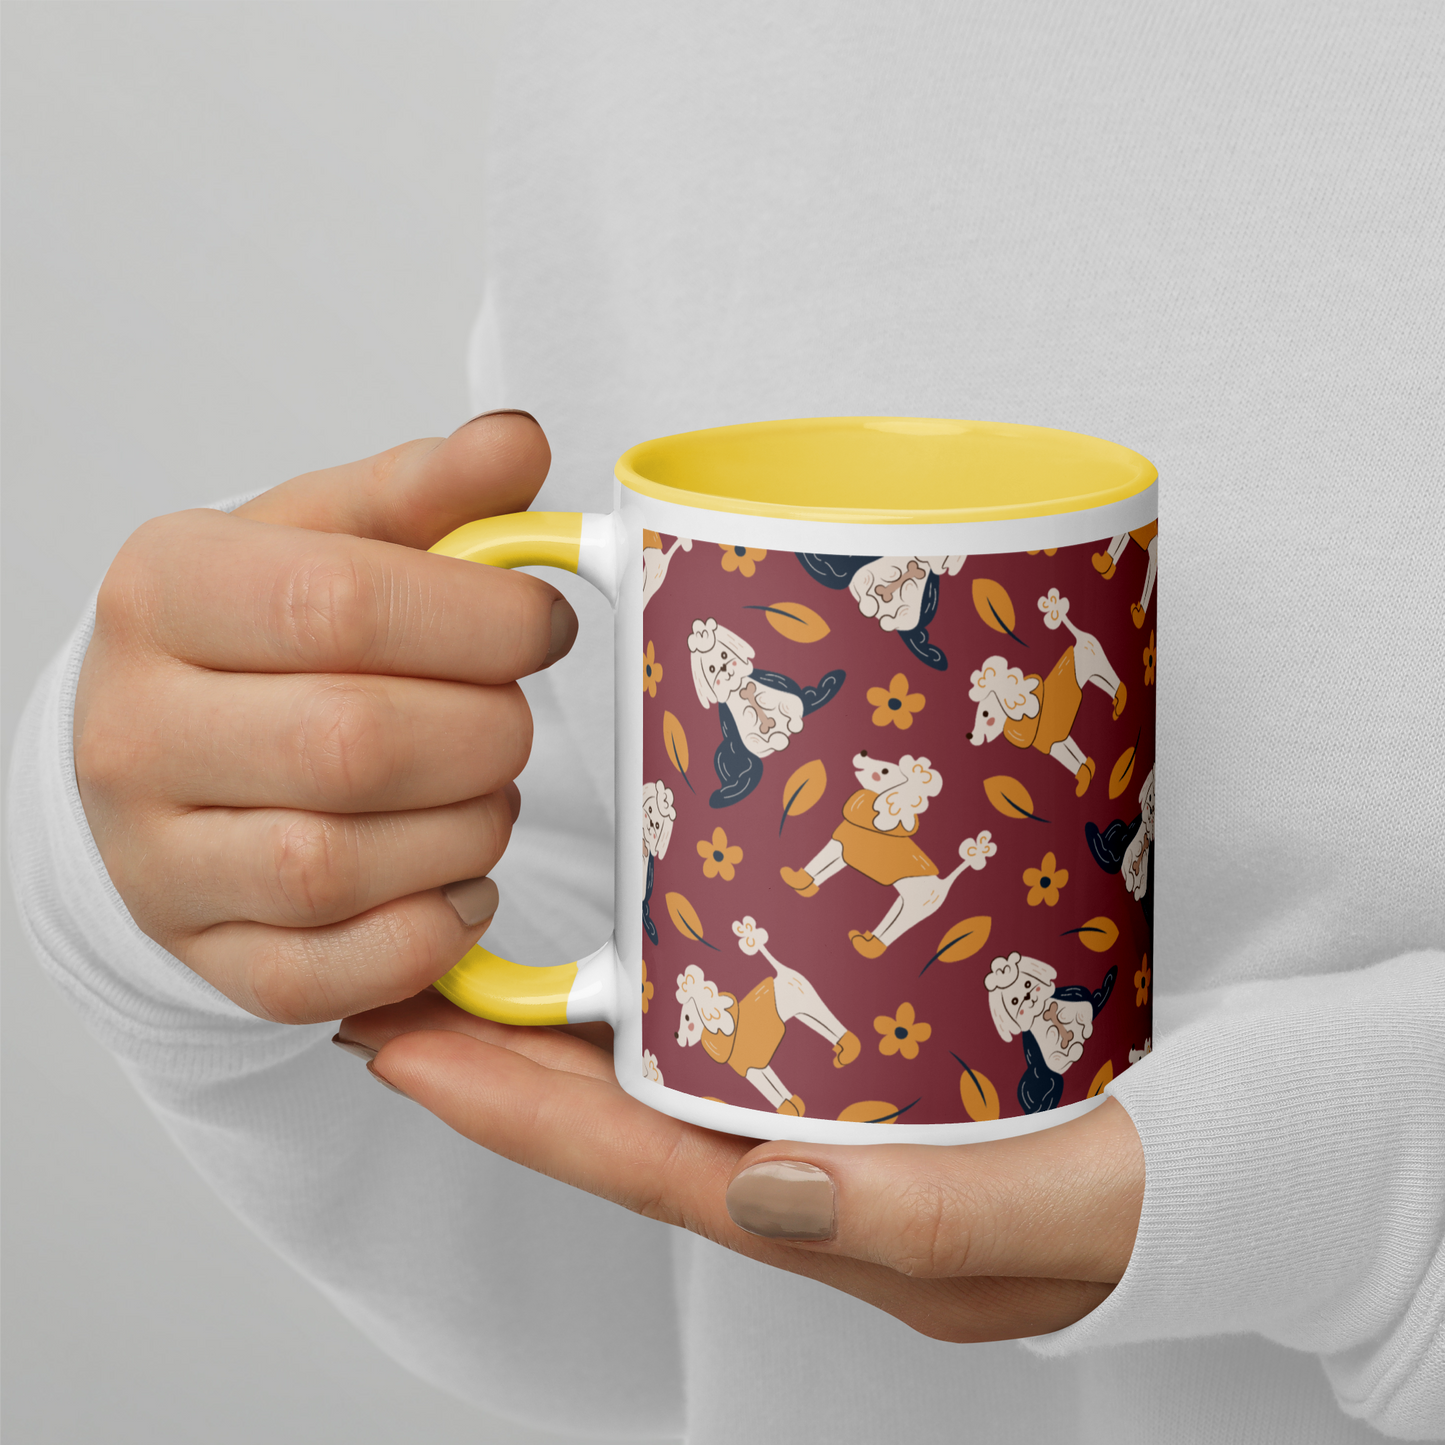 Cozy Dogs | Seamless Patterns | White Ceramic Mug with Color Inside - #9